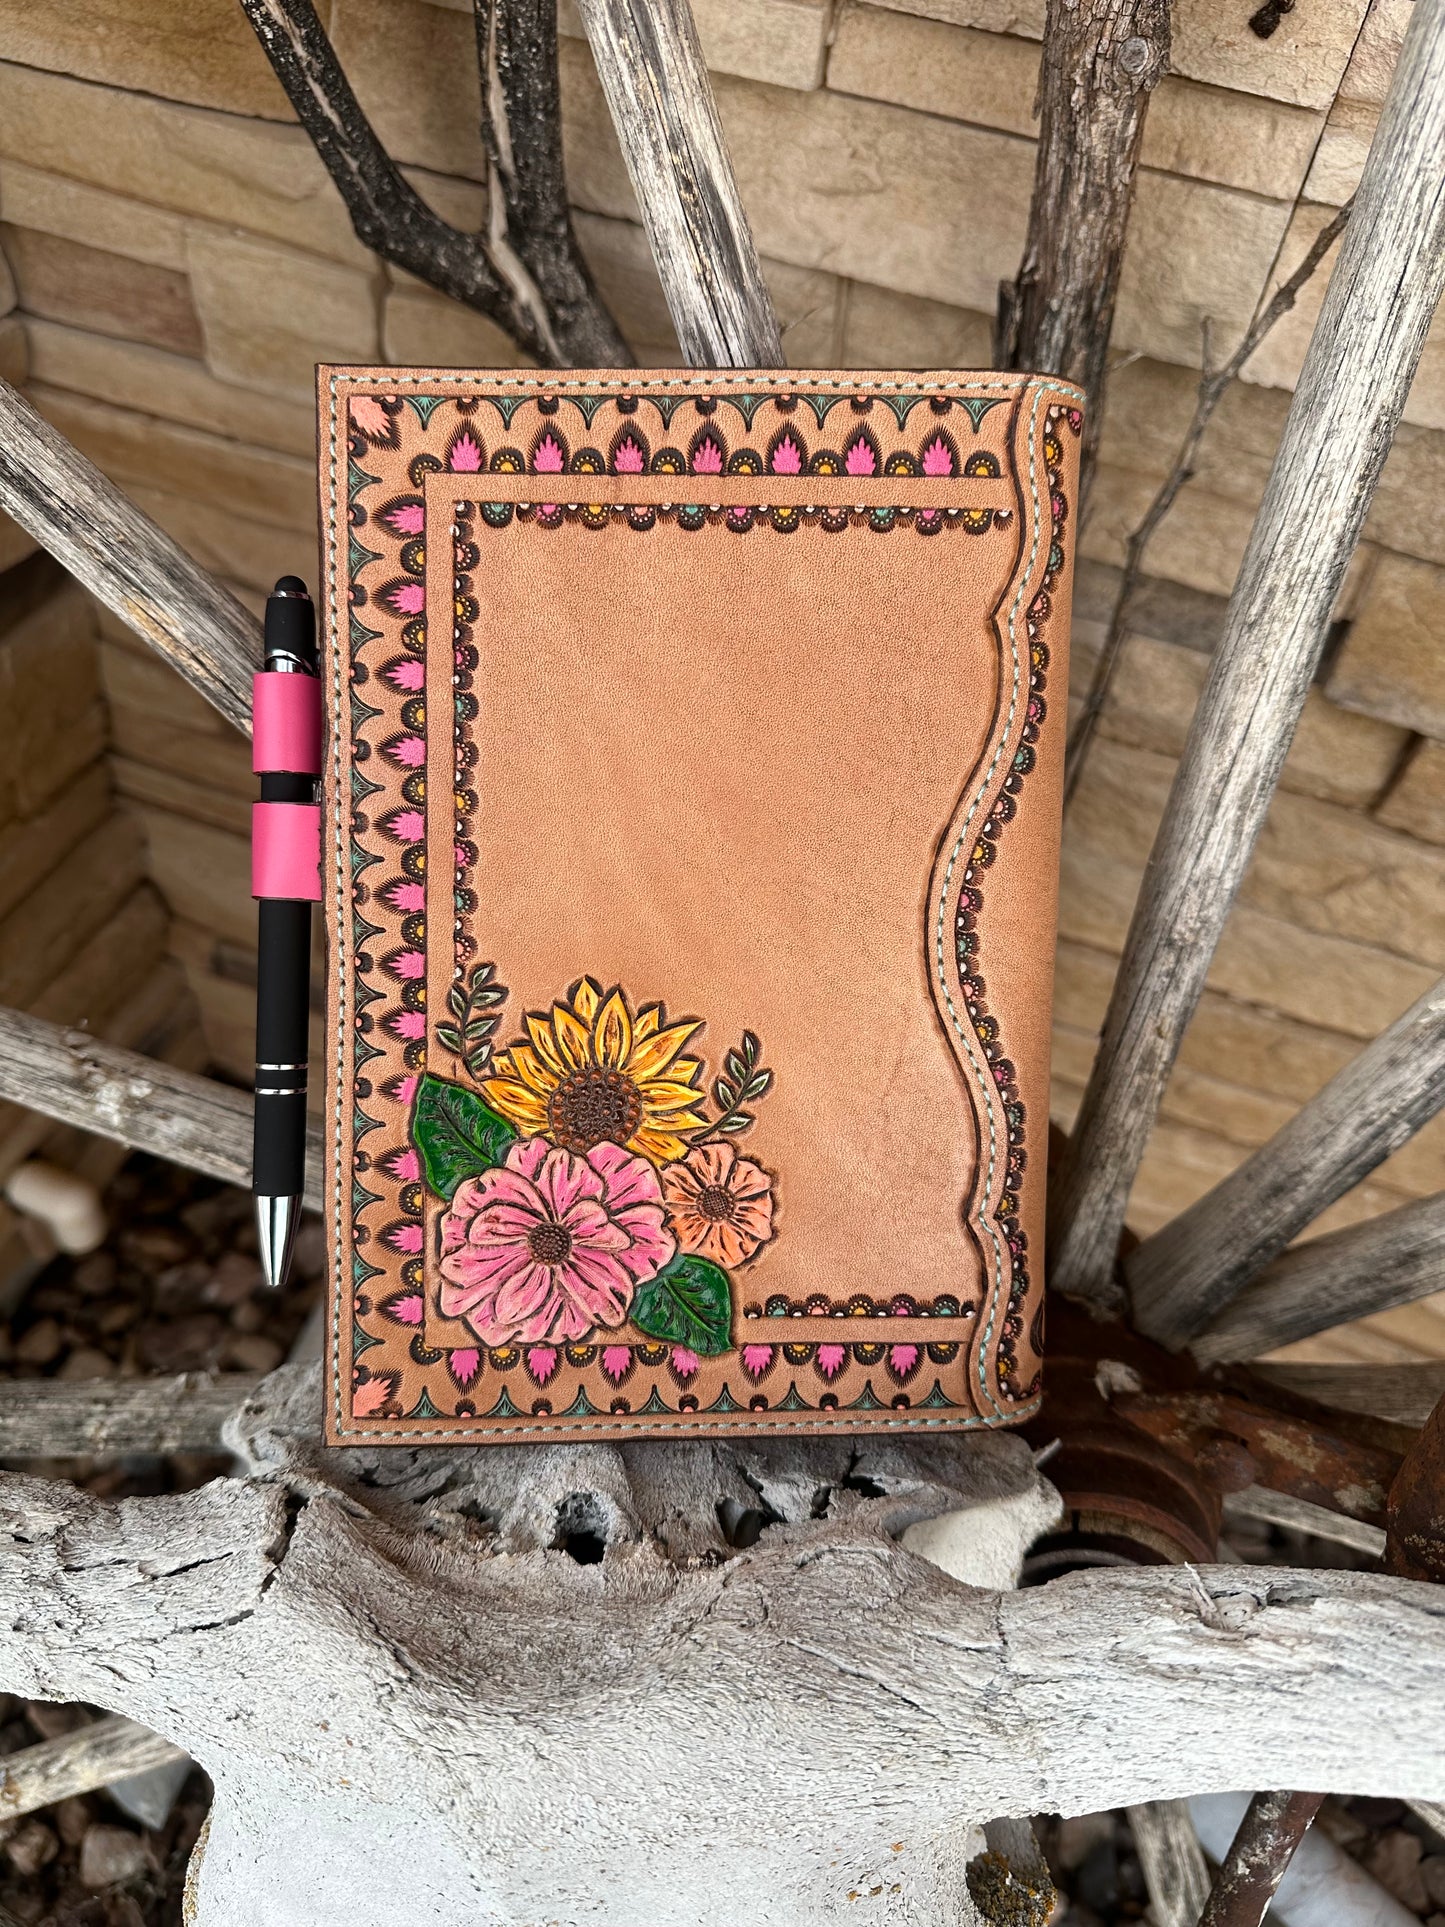 Western tooled leather floral horse memobook cover